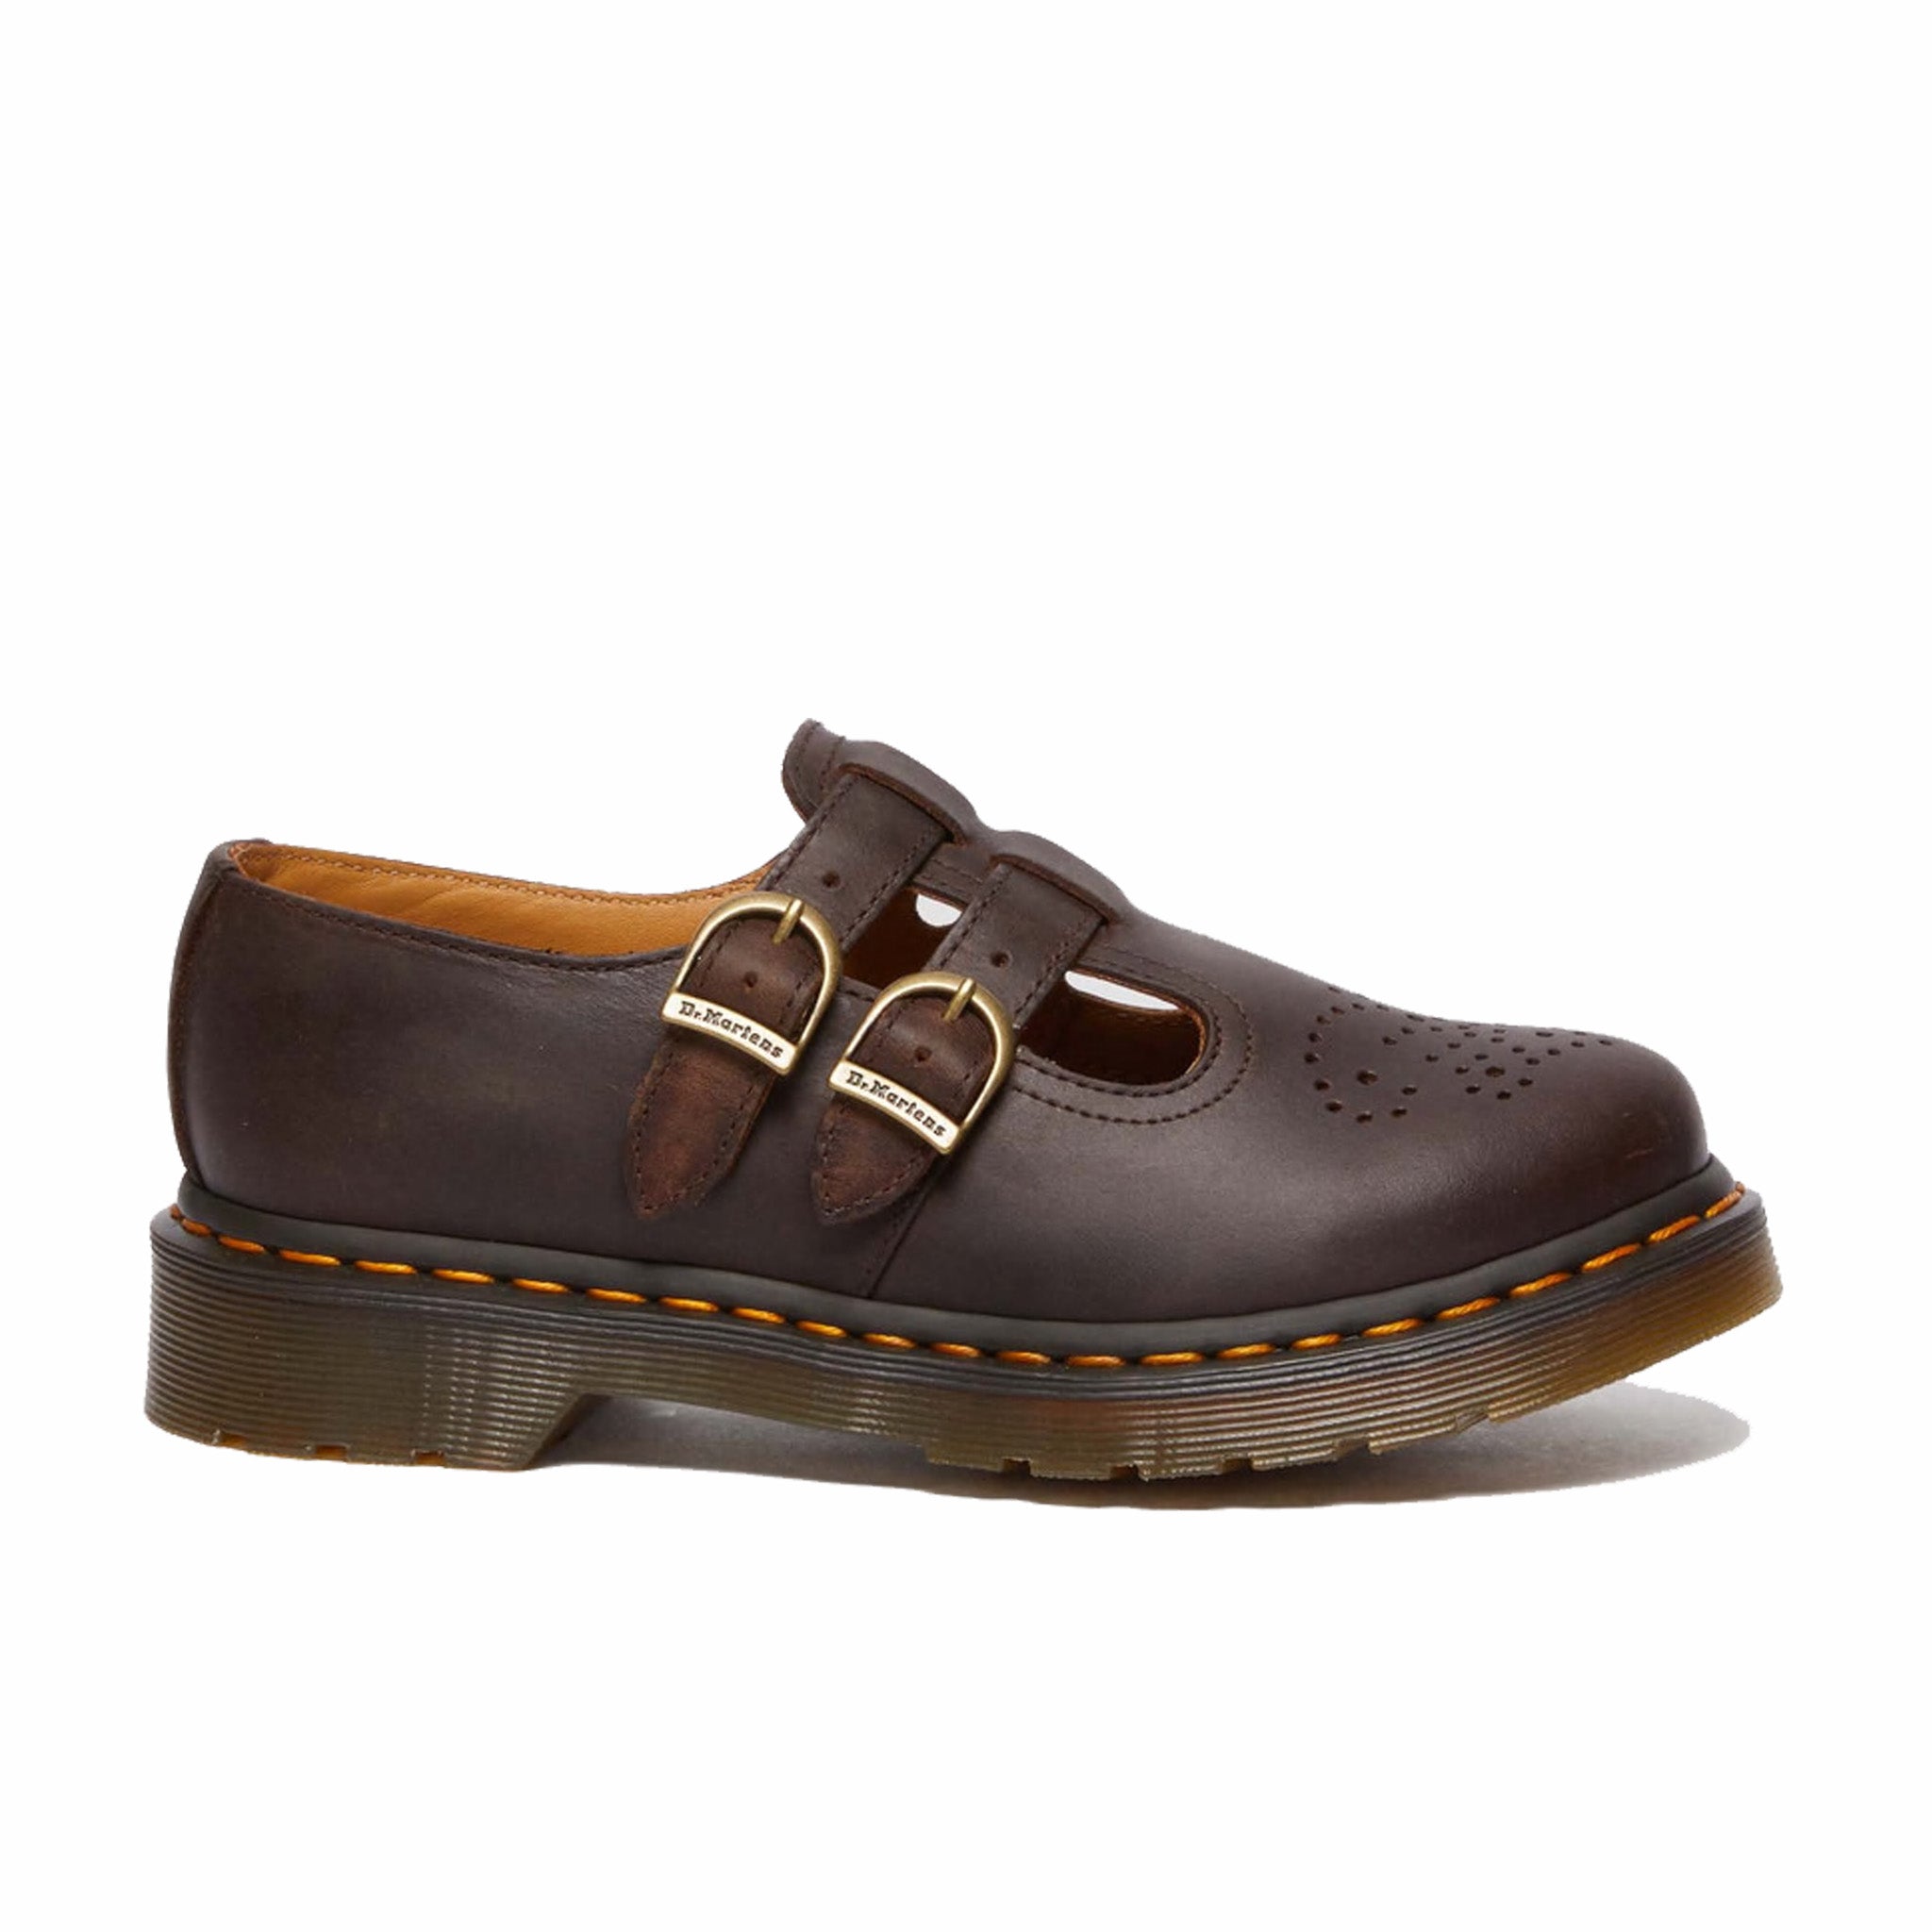 Dr. Martens, Dr. Martens Donna 8065 Crazy Horse Leather Mary Jane (Marrone Scuro Crazy Horse)